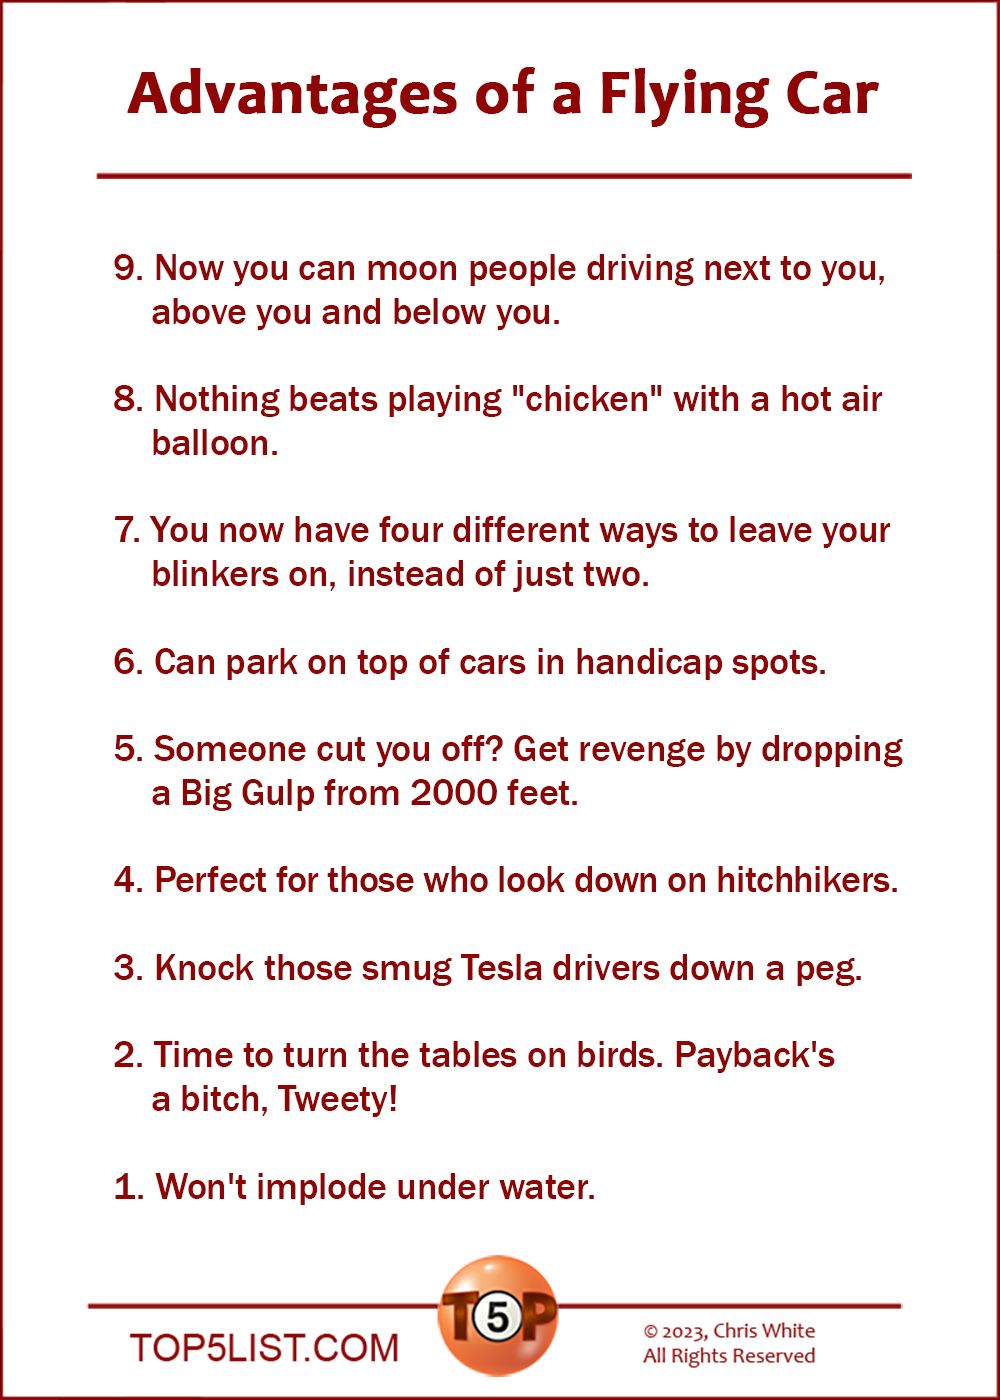 The Top 9 Advantages of a Flying Car  9. Now you can moon people driving next to you, above you and below you.  8. Nothing beats playing "chicken" with a hot air balloon.  7. You now have four different ways to leave your blinkers on, instead of just two.  6. Can park on top of cars in handicap spots.  5. Someone cut you off? Get revenge by dropping a Big Gulp from 2000 feet.  4. Perfect for those who look down on hitchhikers.  3. Knock those smug Tesla drivers down a peg.  2. Time to turn the tables on birds. Payback's a bitch, Tweety!  And the number 1 Advantages of a Flying Car...  1. Won't implode under water.